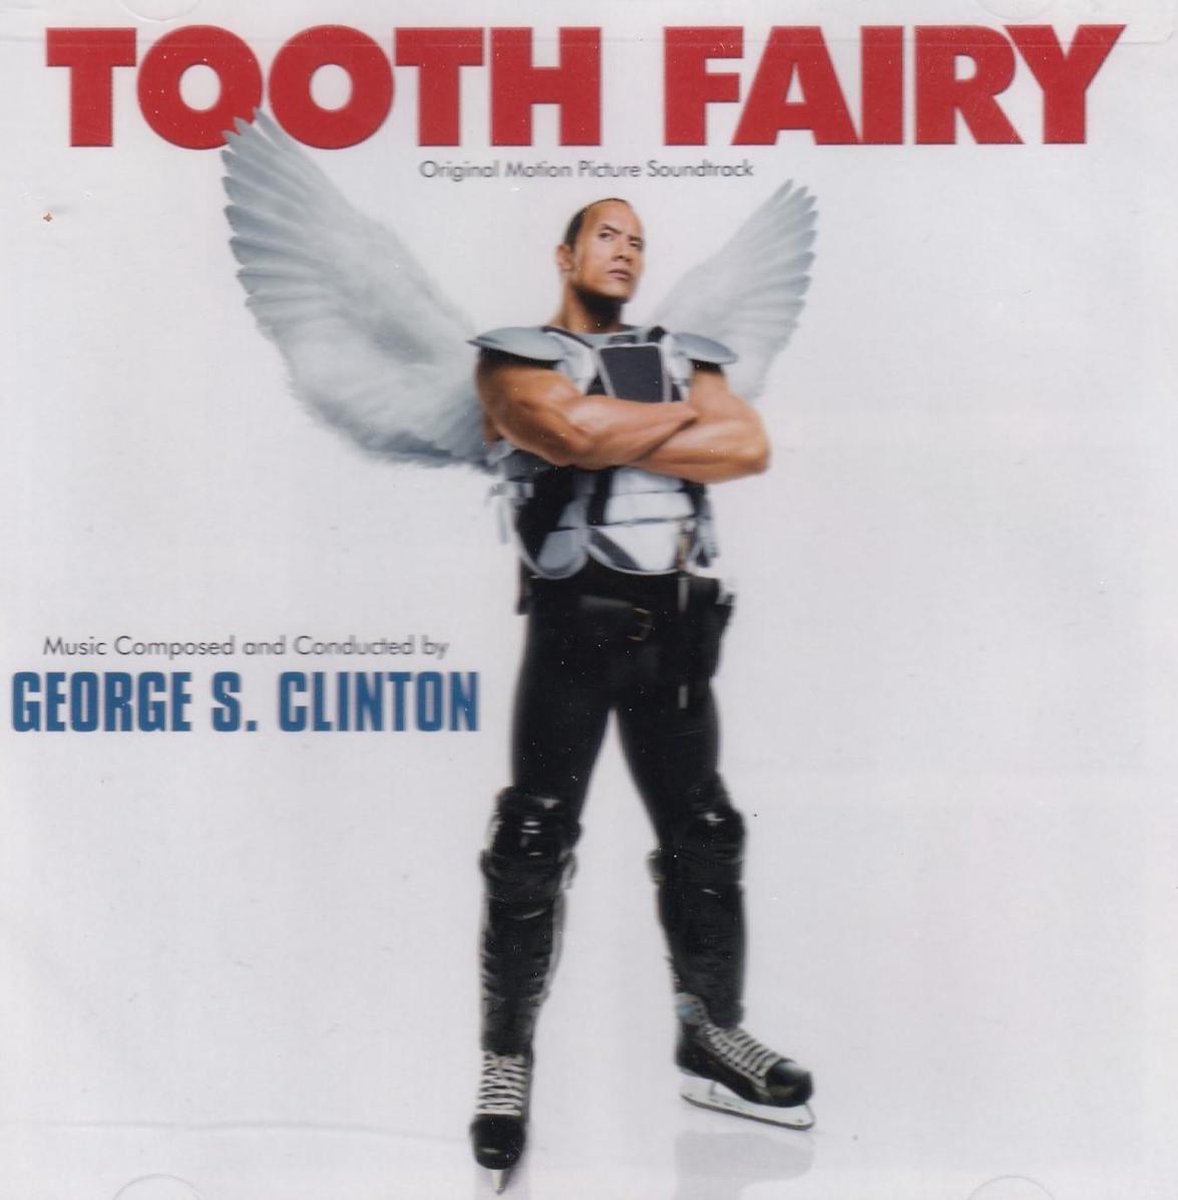 Tooth Fairy [Original Motion Picture Soundtrack]